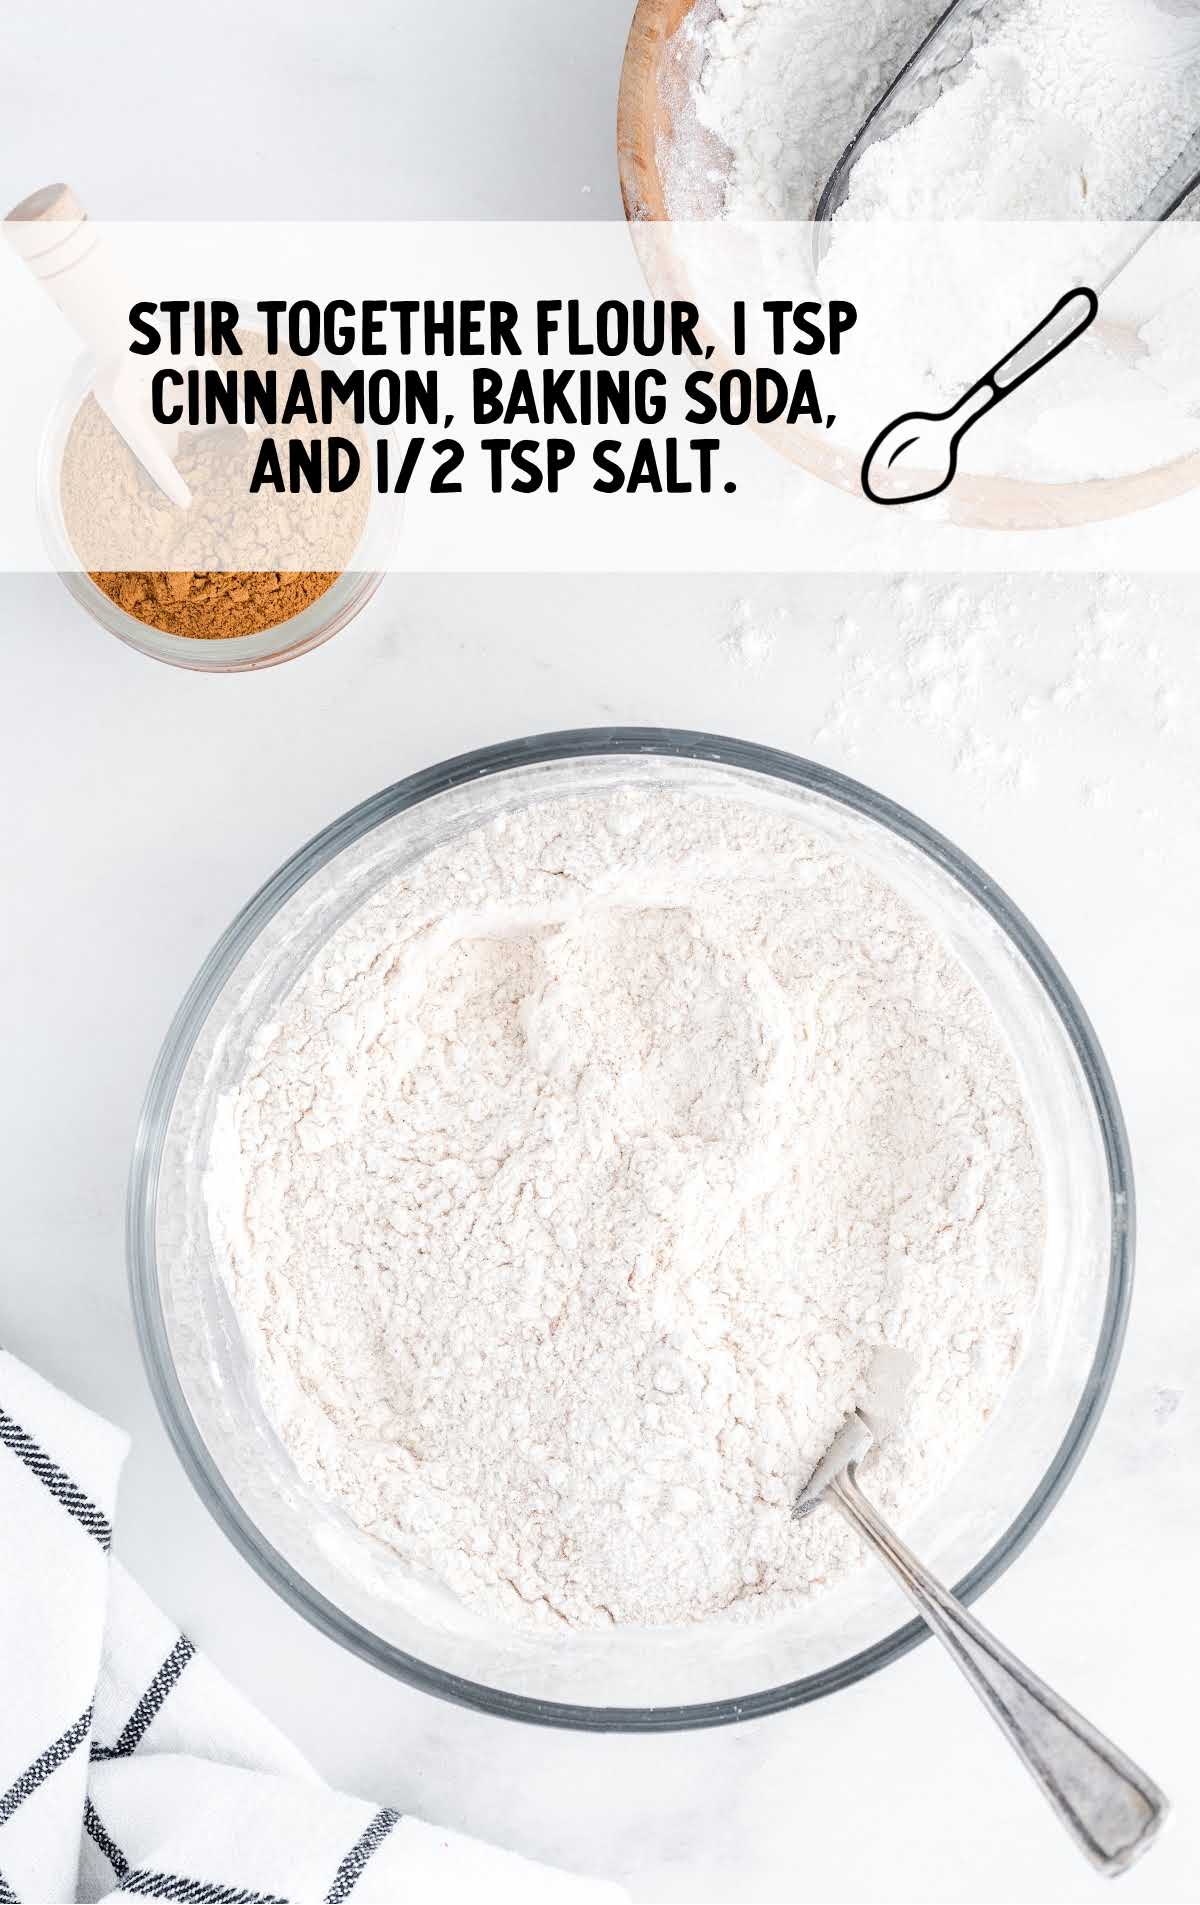 all-purpose flour, cinnamon, baking soda, and salt folded together in a bowl